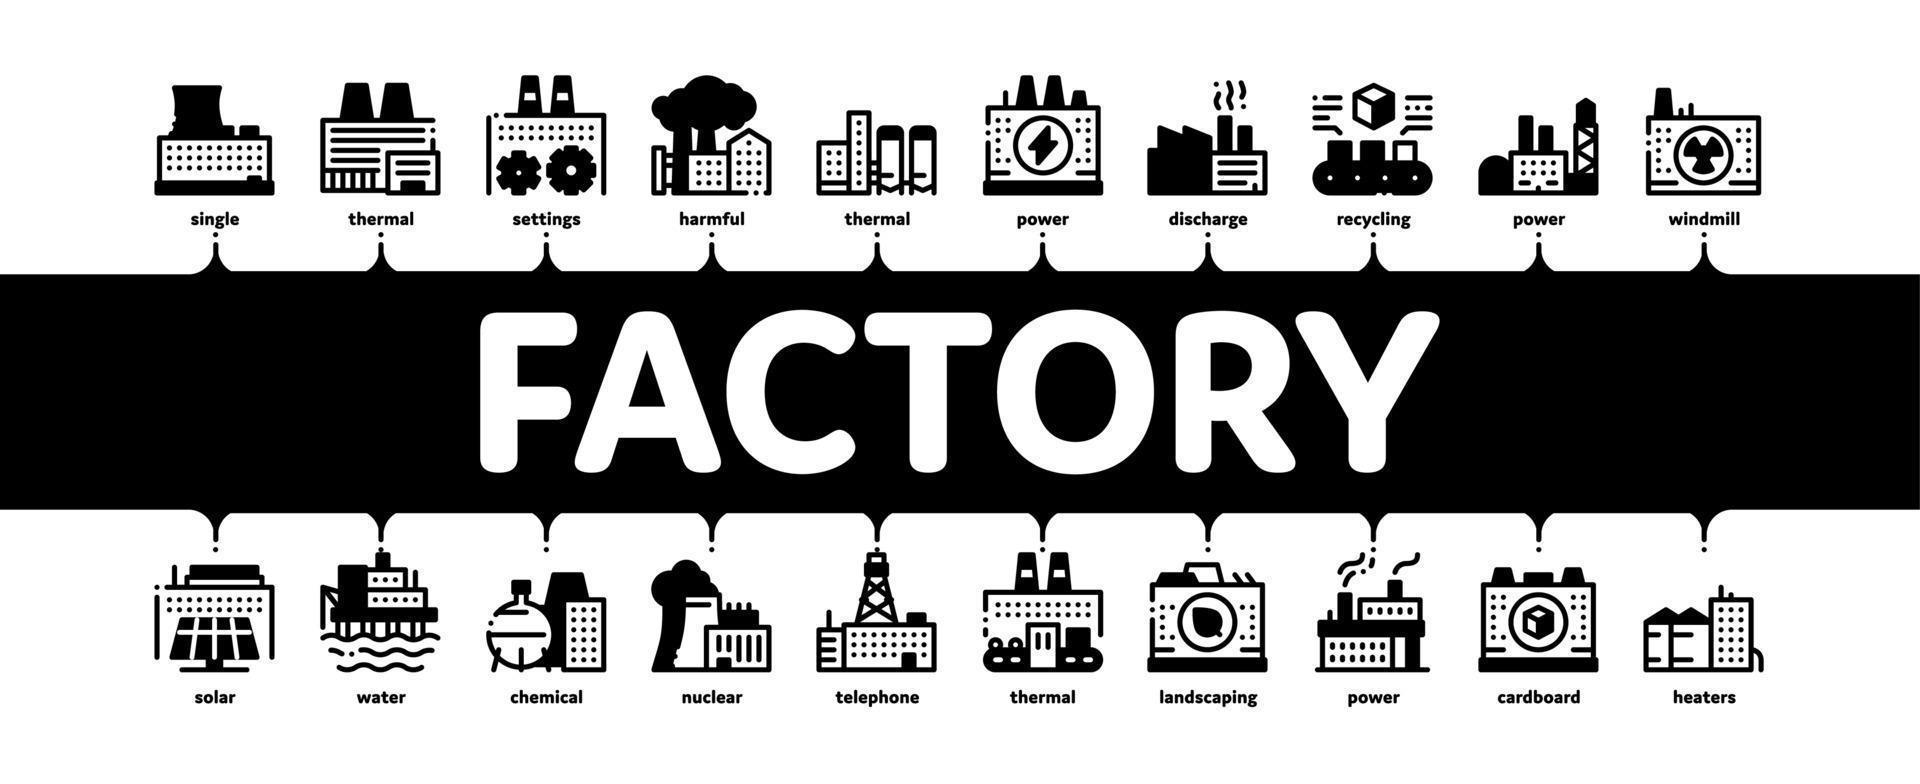 Factory Industrial Minimal Infographic Banner Vector